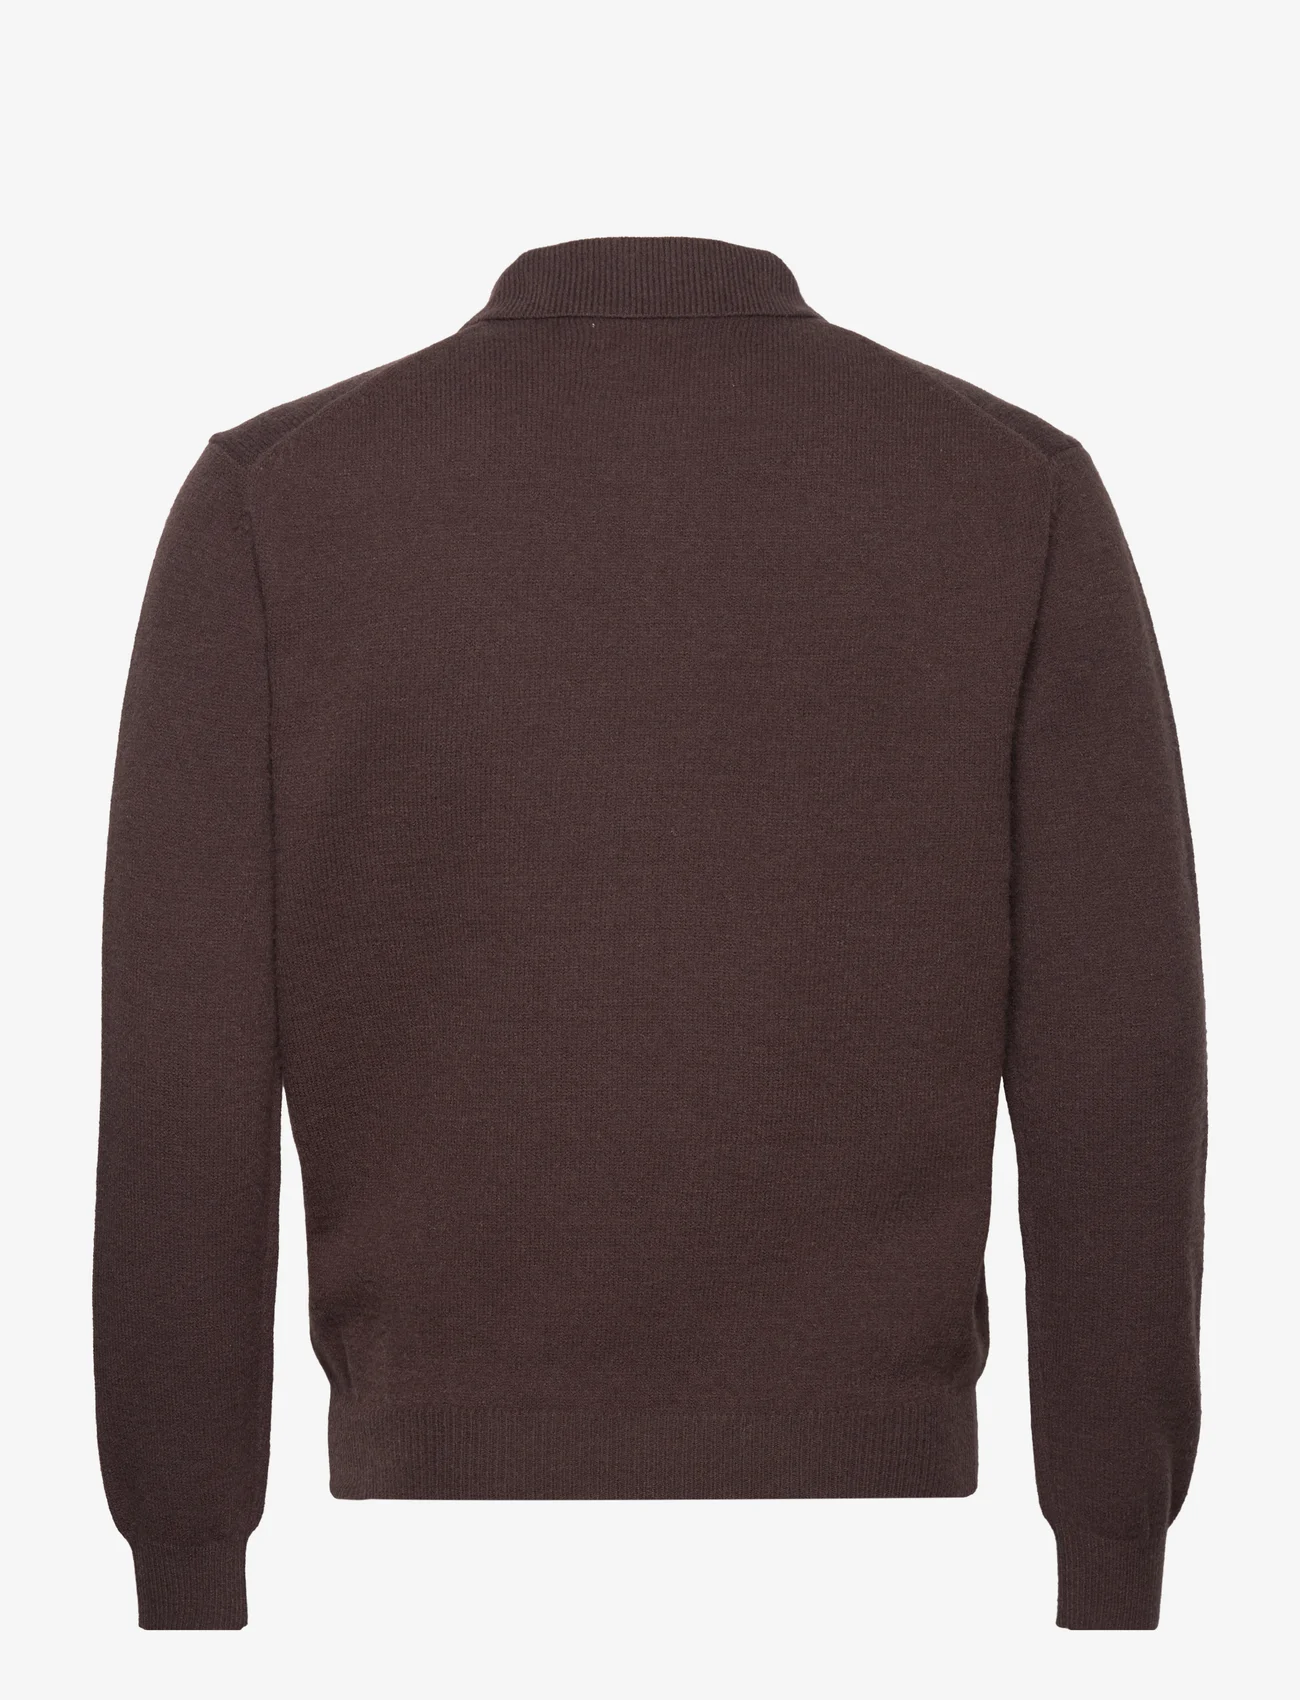 Taikan - Marle L/S Polo Sweater-Brown - strikkede poloer - brown - 1